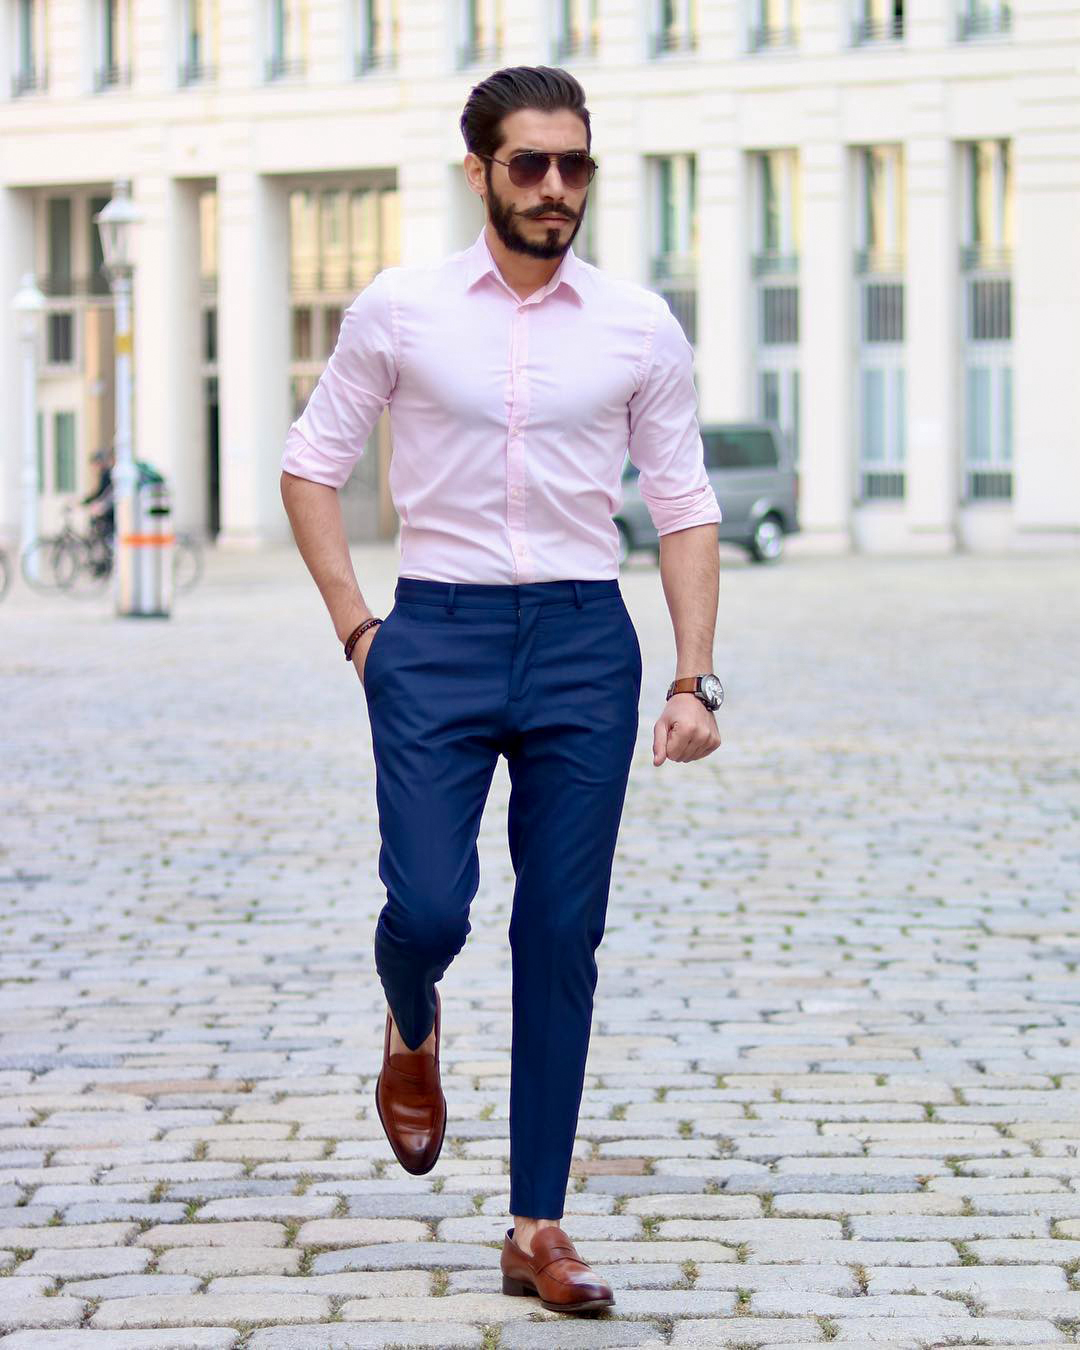 solid pink shirt, blue pants, and brown shoes